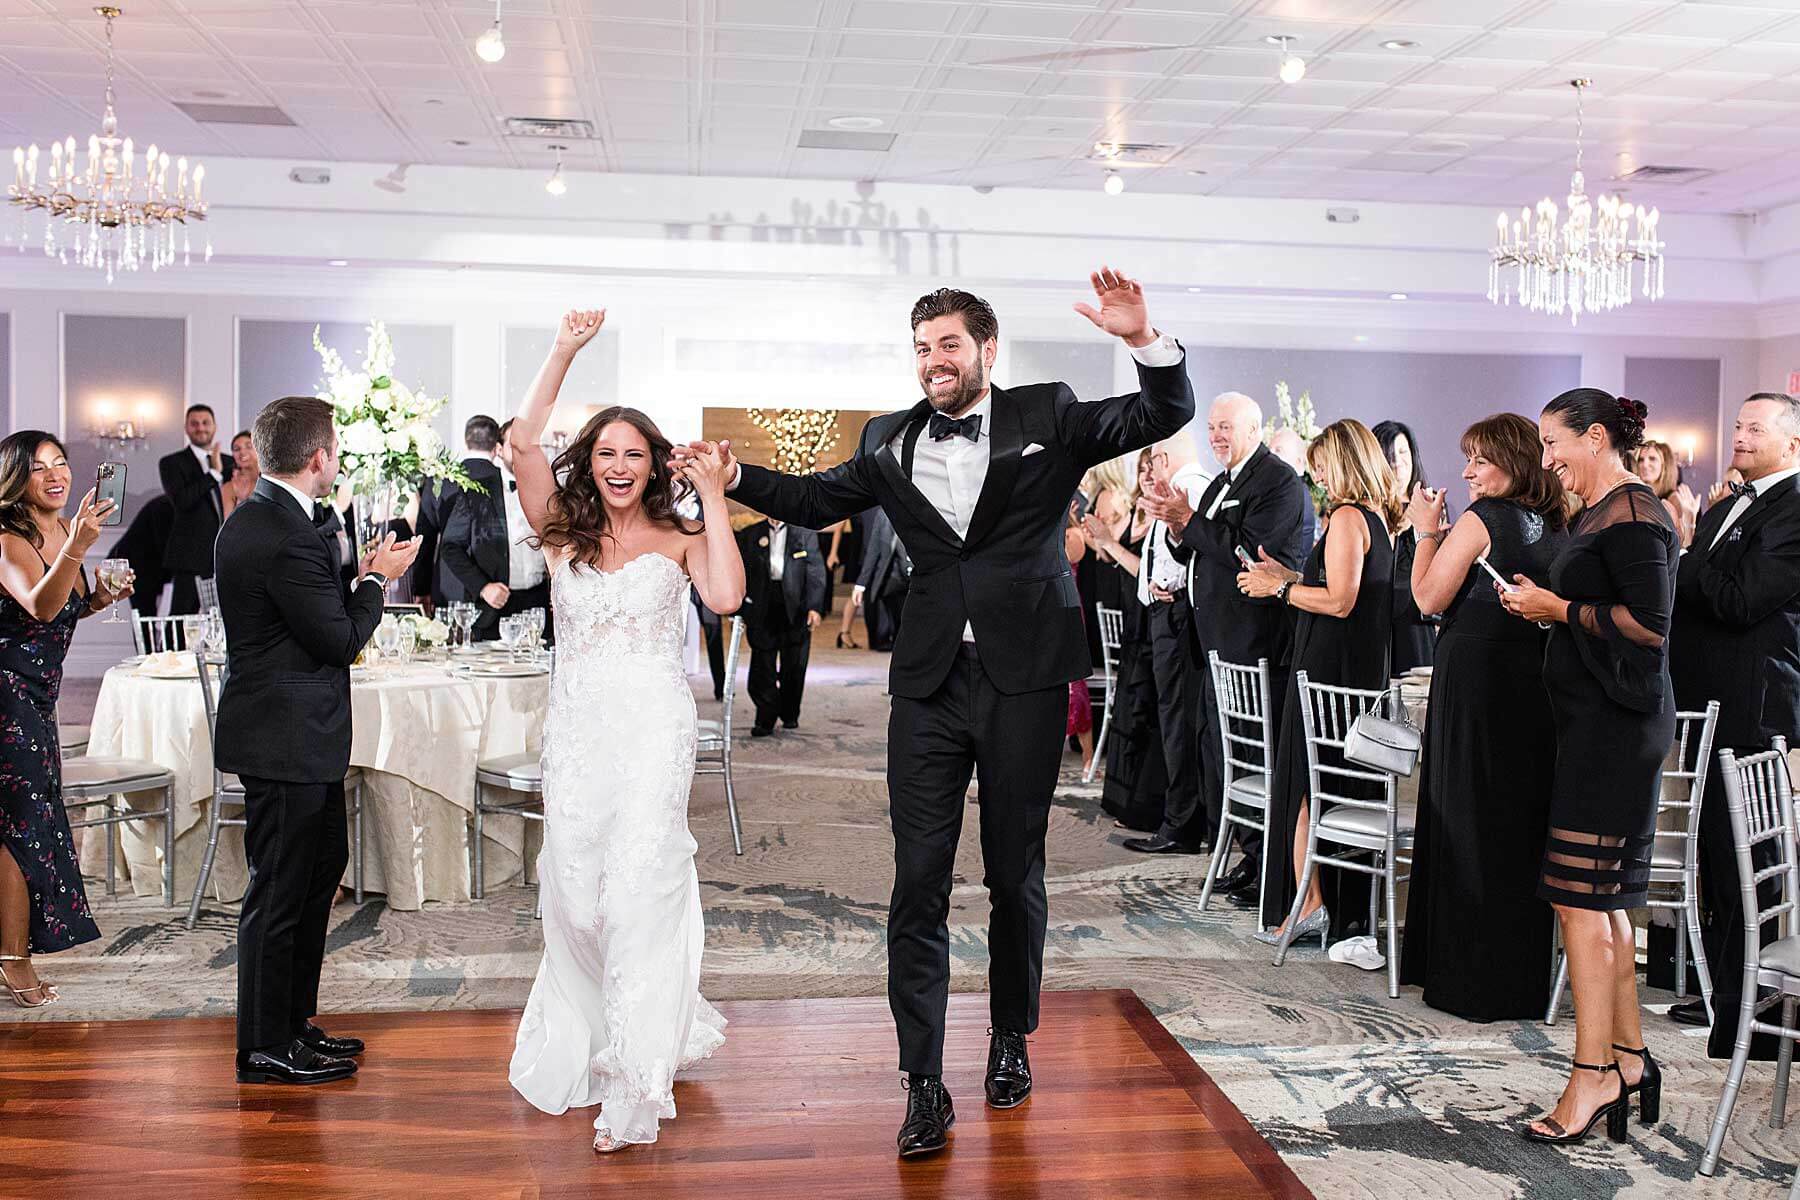 A bride and groom joyfully walk down the aisle at their outdoor wedding reception in one of the breathtaking New Jersey wedding venues.